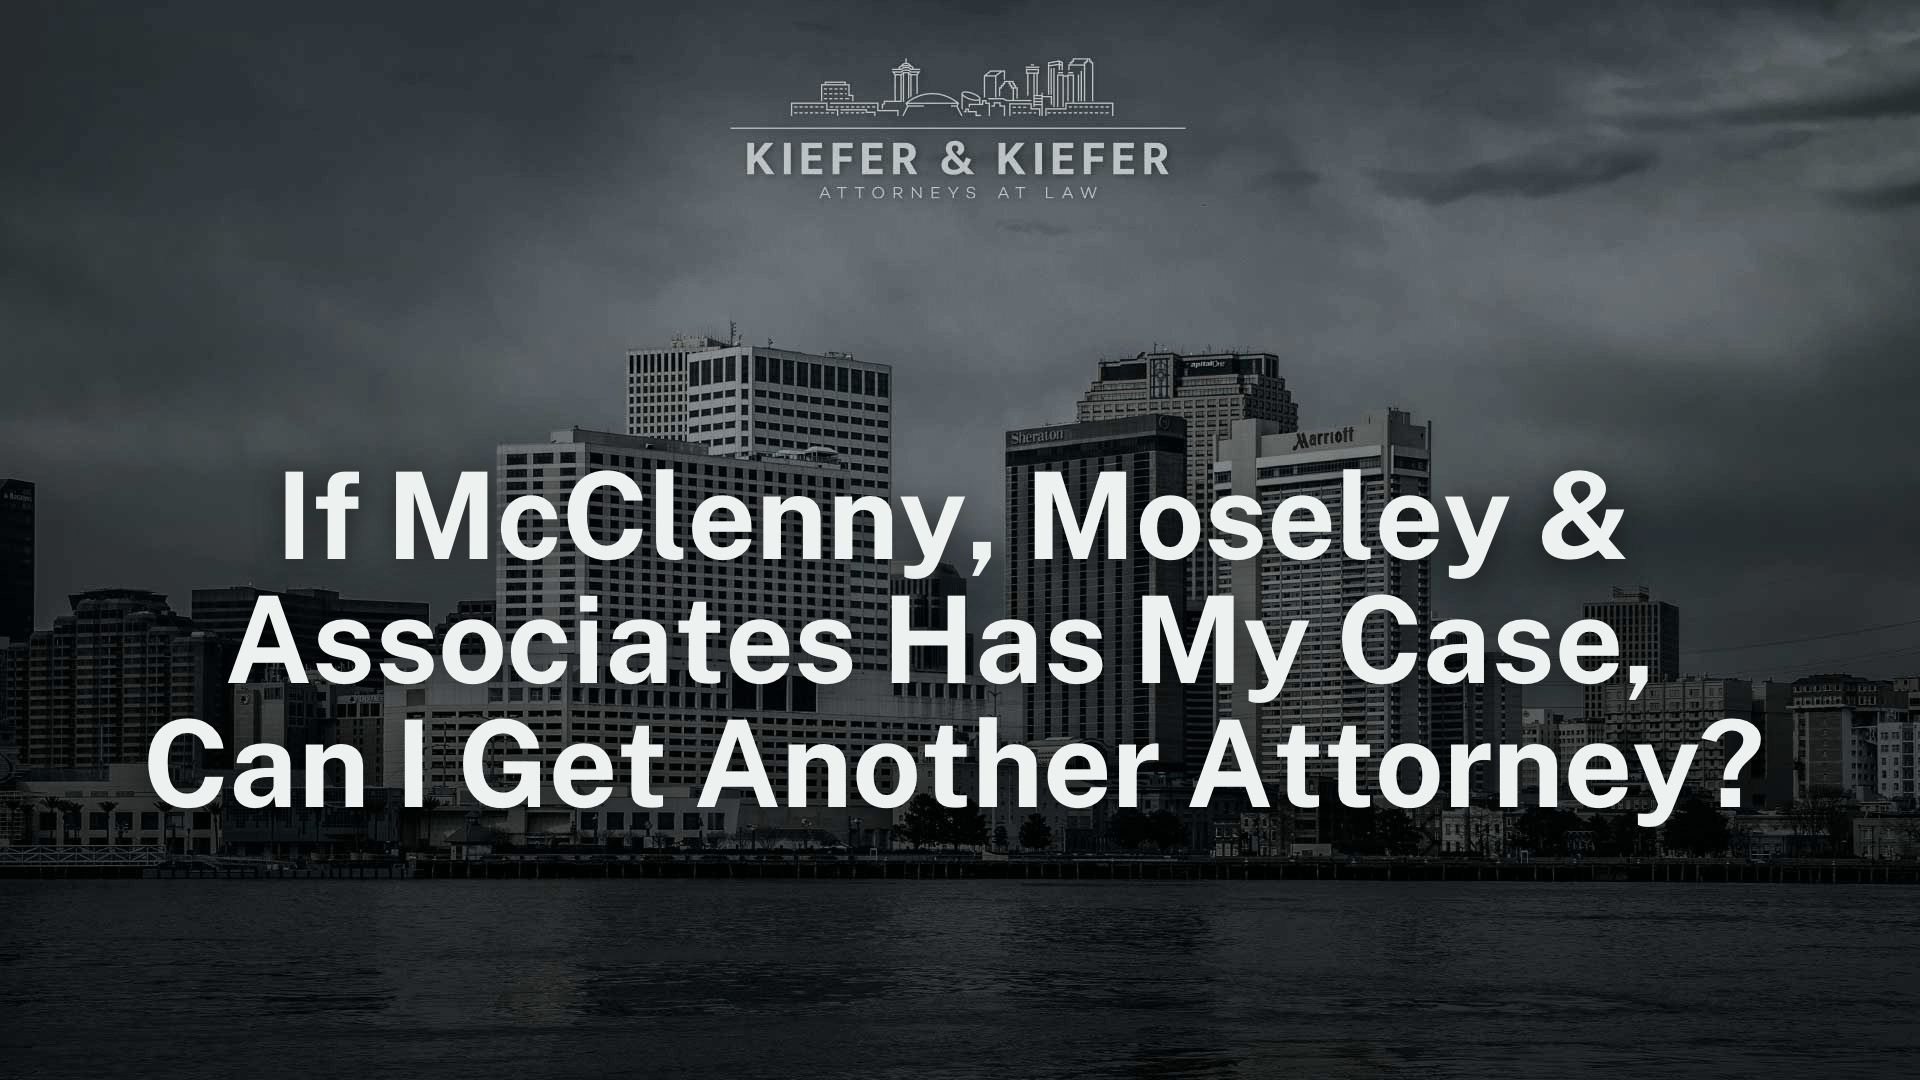 If McClenny, Moseley & Associates Has My Case, Can I Get Another Attorney - Kiefer & Kiefer New Orleans Personal Injury Attorneys